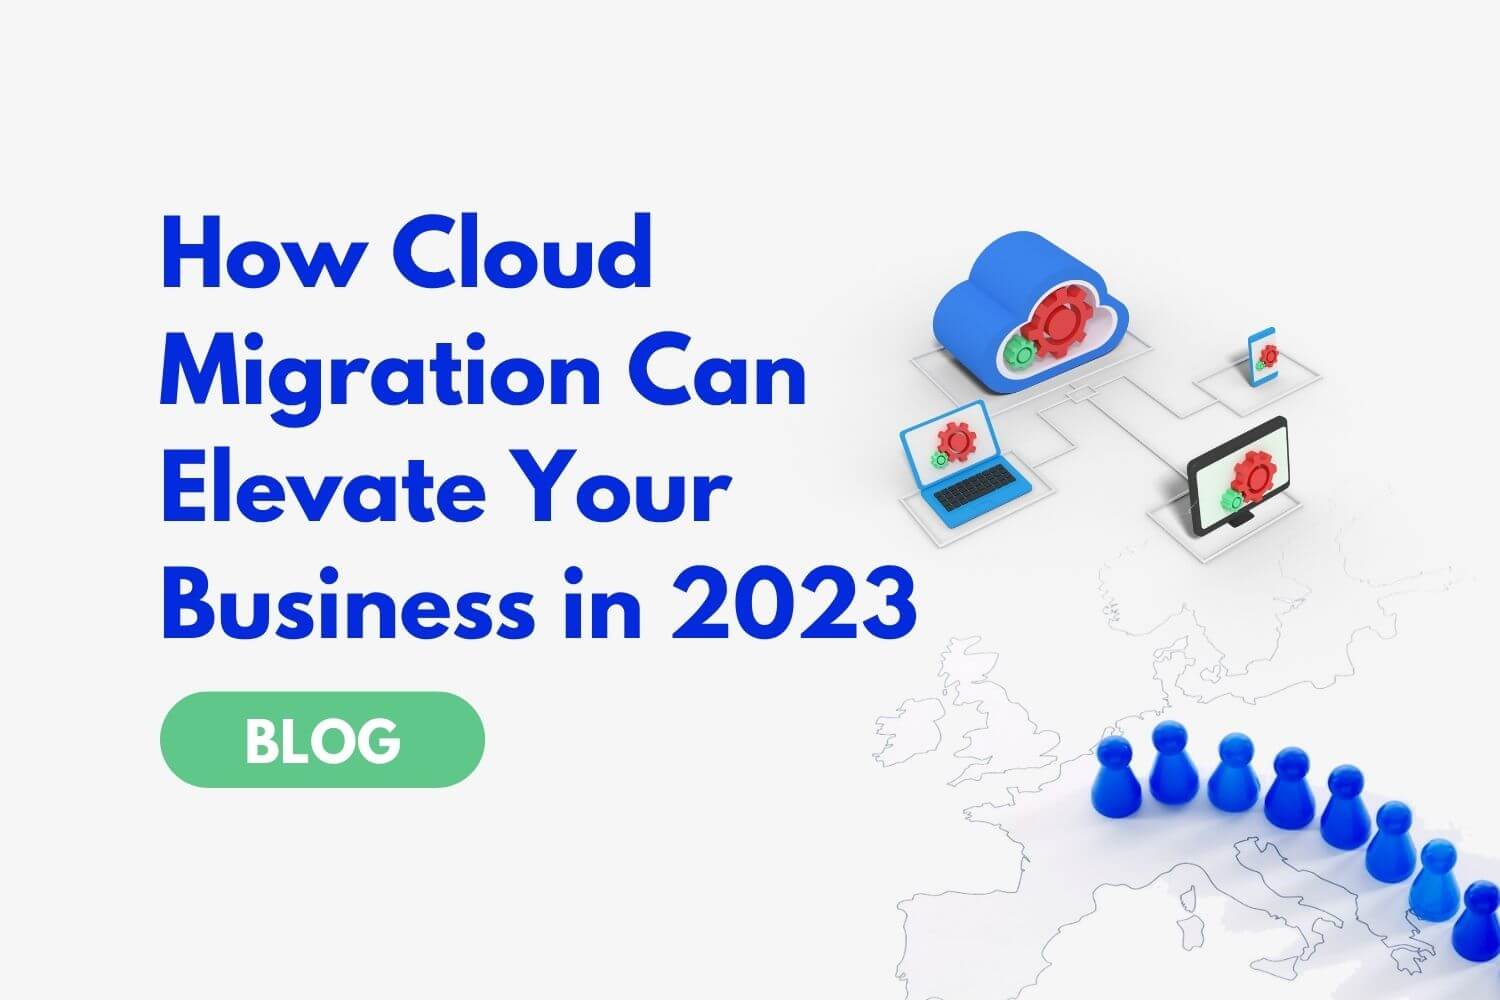 How Cloud Migration Can Elevate Your Business in 2023